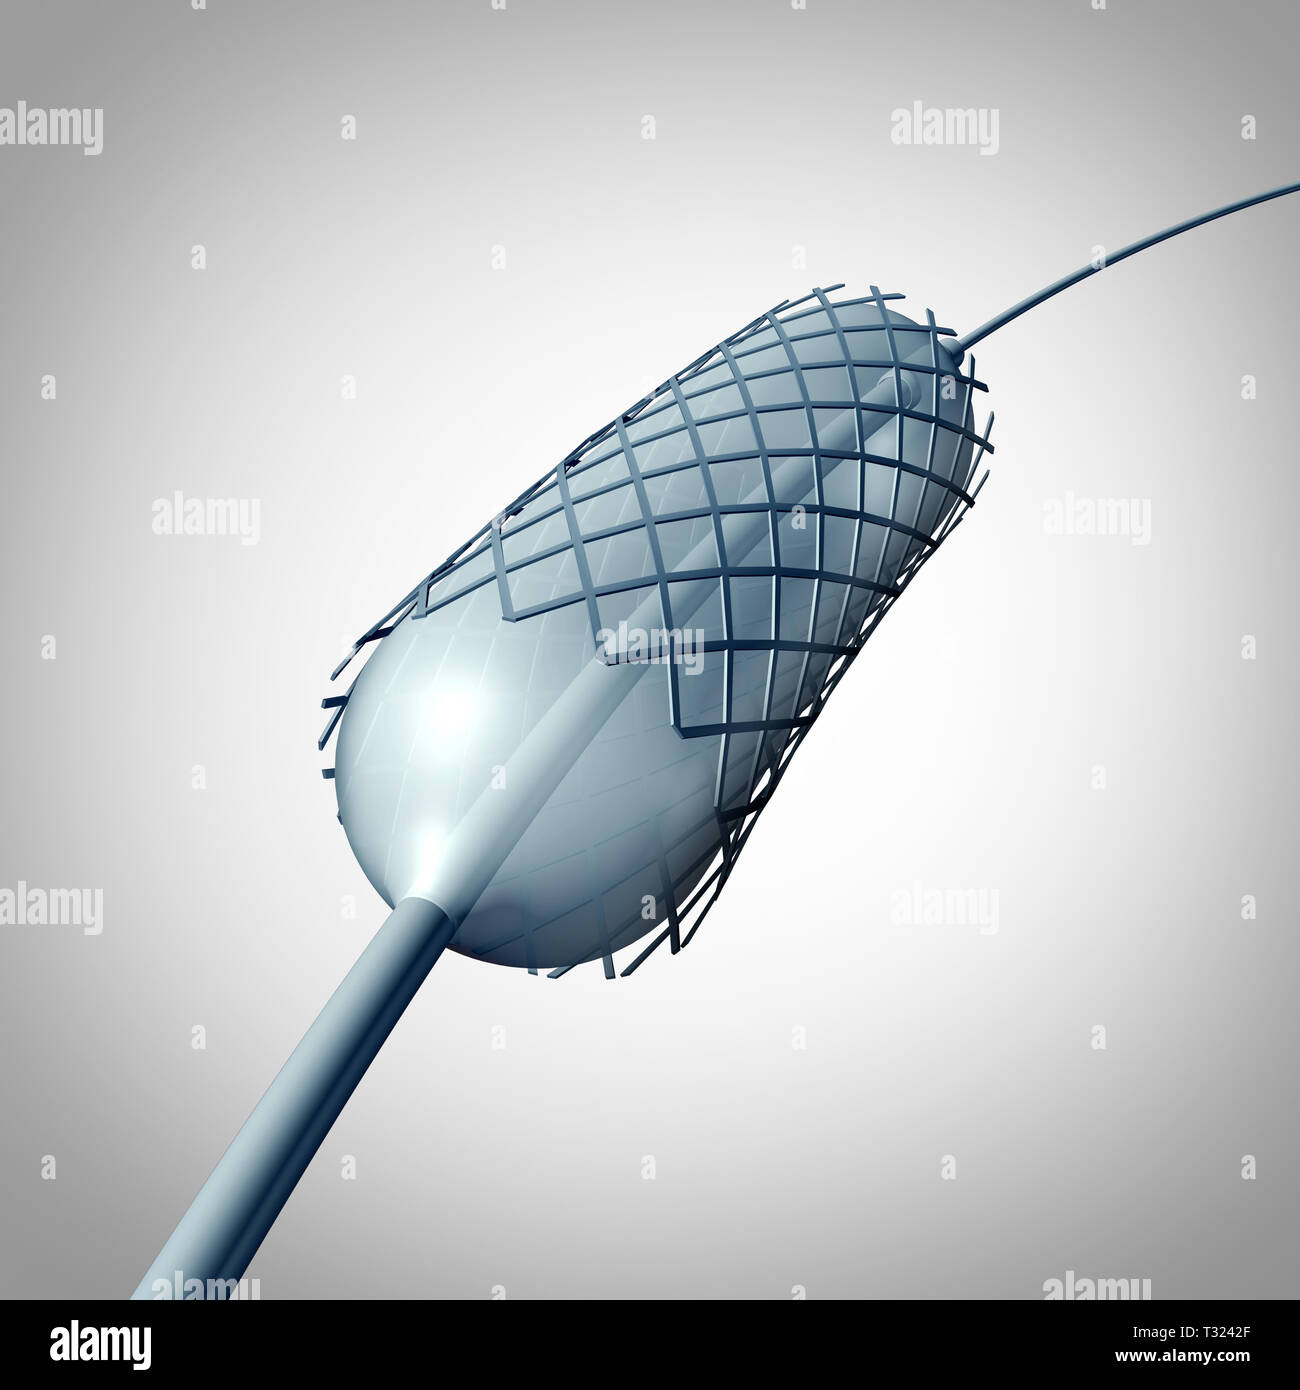 Catheter stent implantation medical procedure equipment concept as a circulatory medicine symbol for coronary angioplasty as an atherosclerosis. Stock Photo